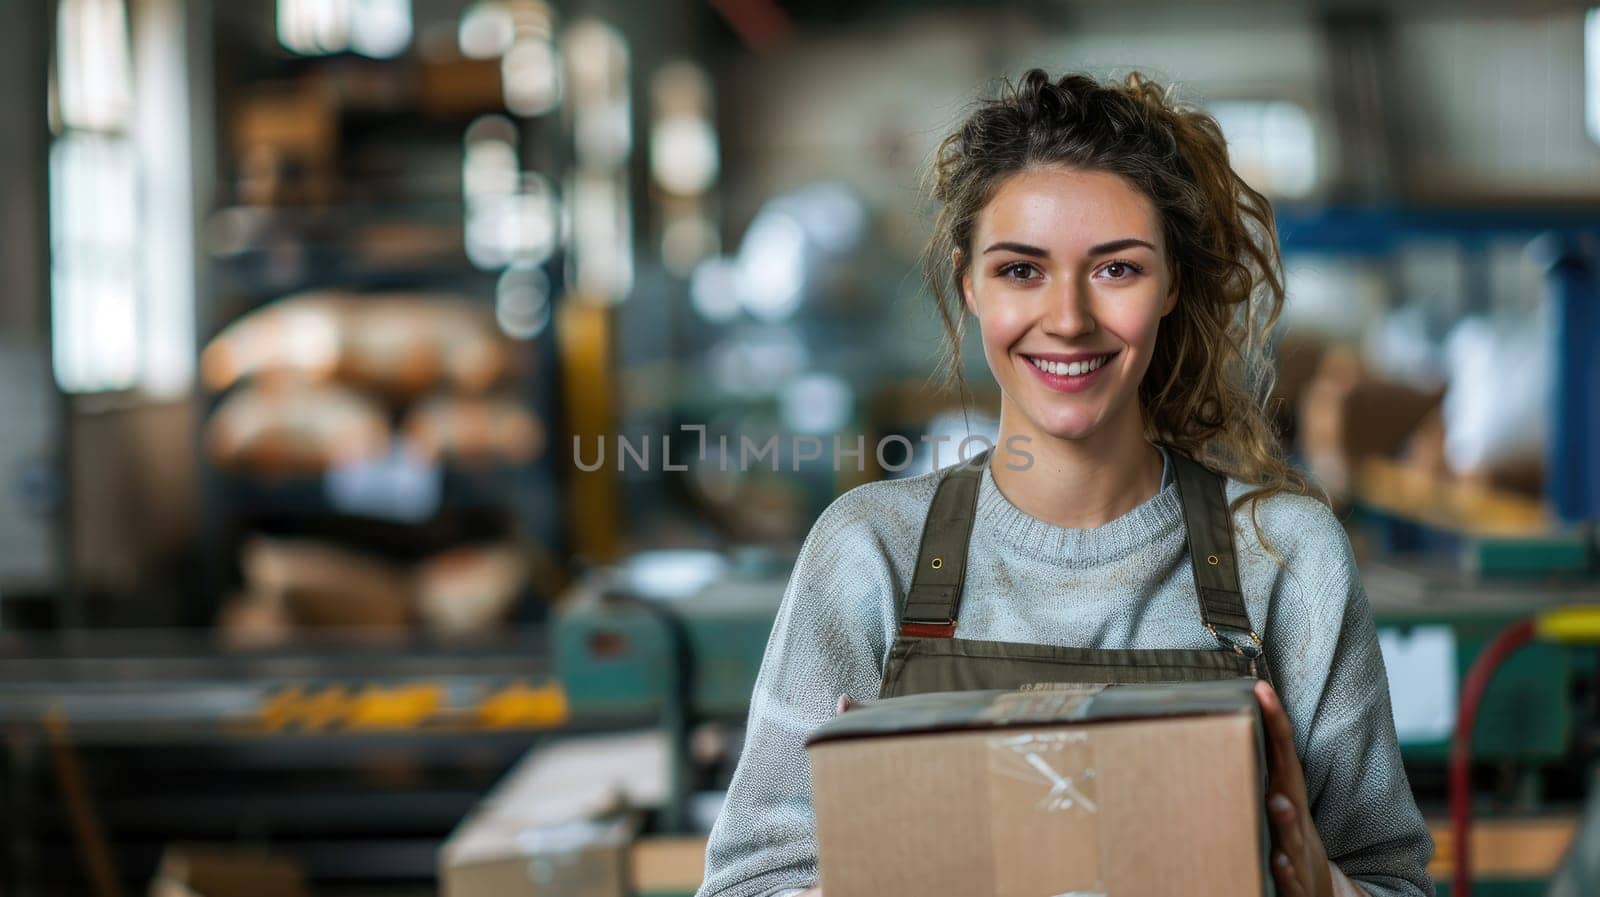 A professional businesswoman is holding a box inside a factory by nijieimu